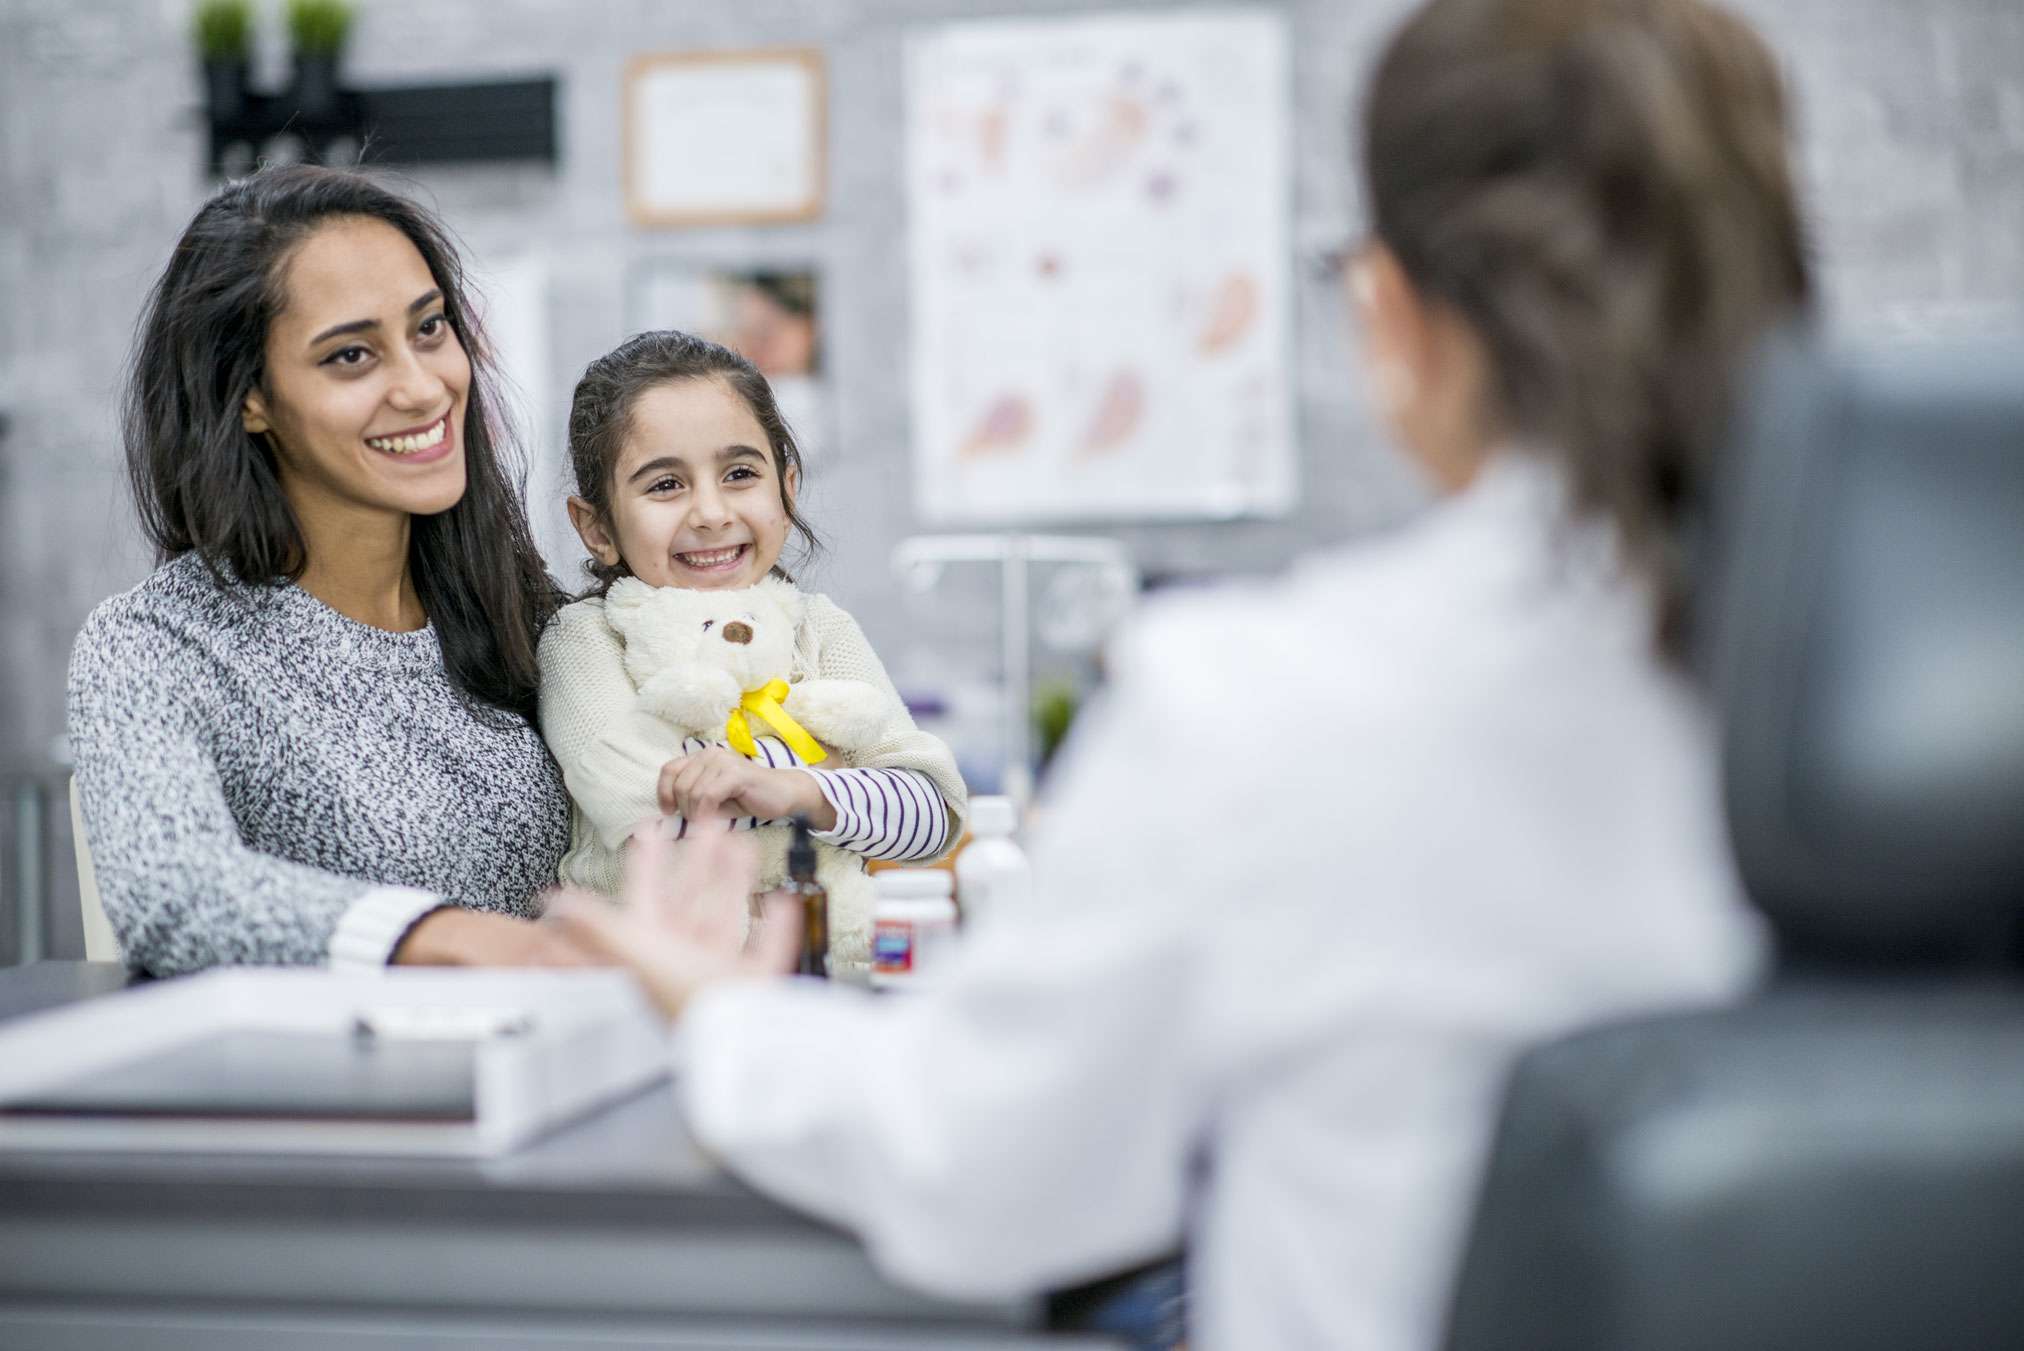 Photo of woman holding a small child and talking to a doctor in the doctor's office. The child is smiling and holding a teddy bear